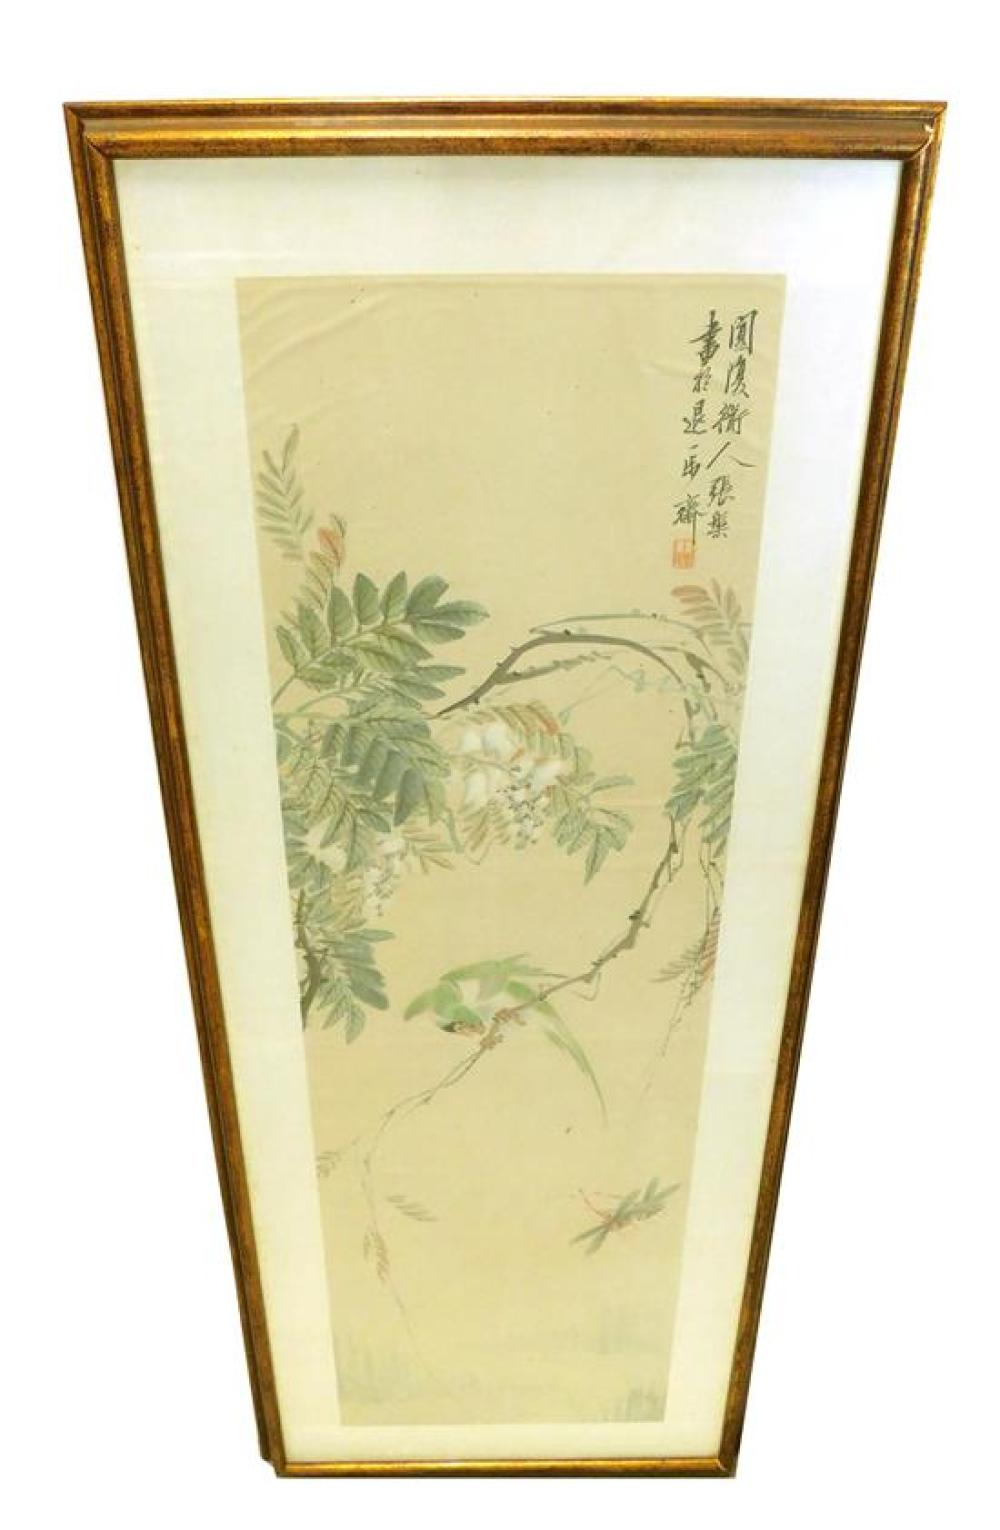 ASIAN: CHINESE FRAMED SCROLL, 20TH